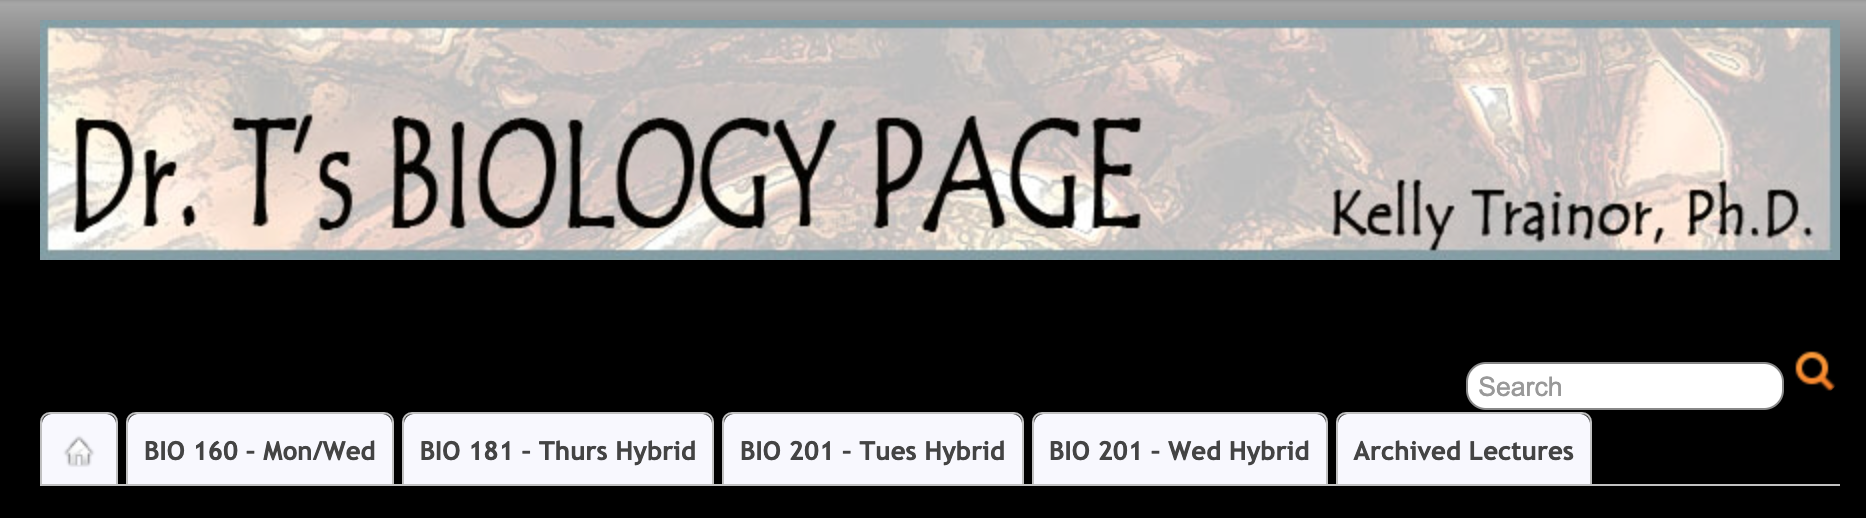 Dr. T's Biology Page website with links to Biology courses.